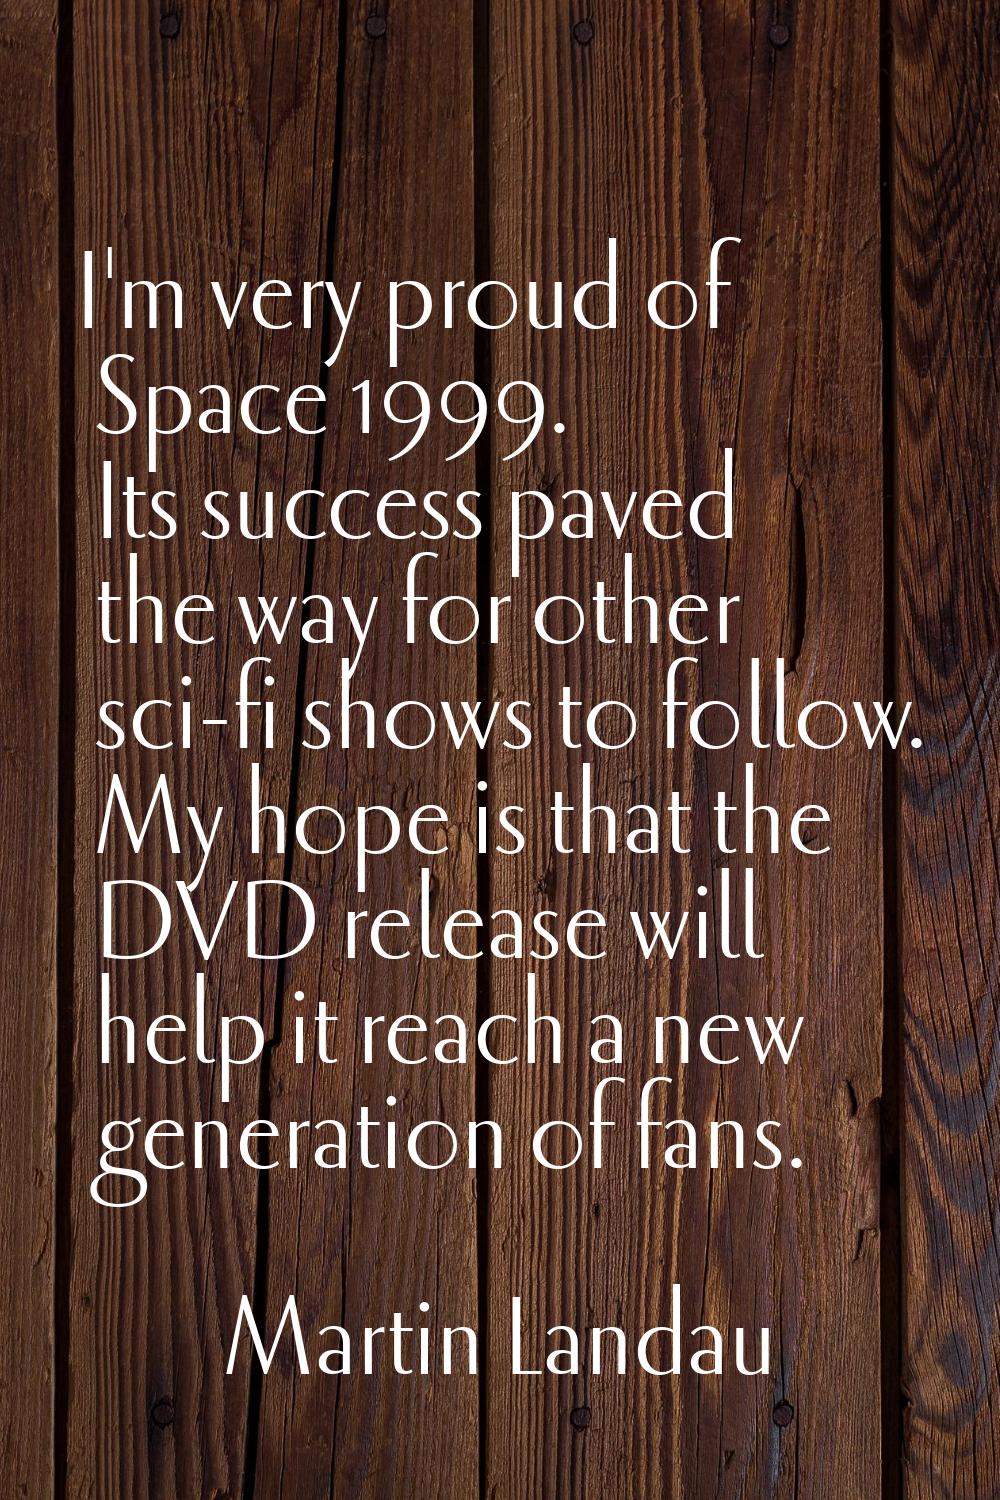 I'm very proud of Space 1999. Its success paved the way for other sci-fi shows to follow. My hope i